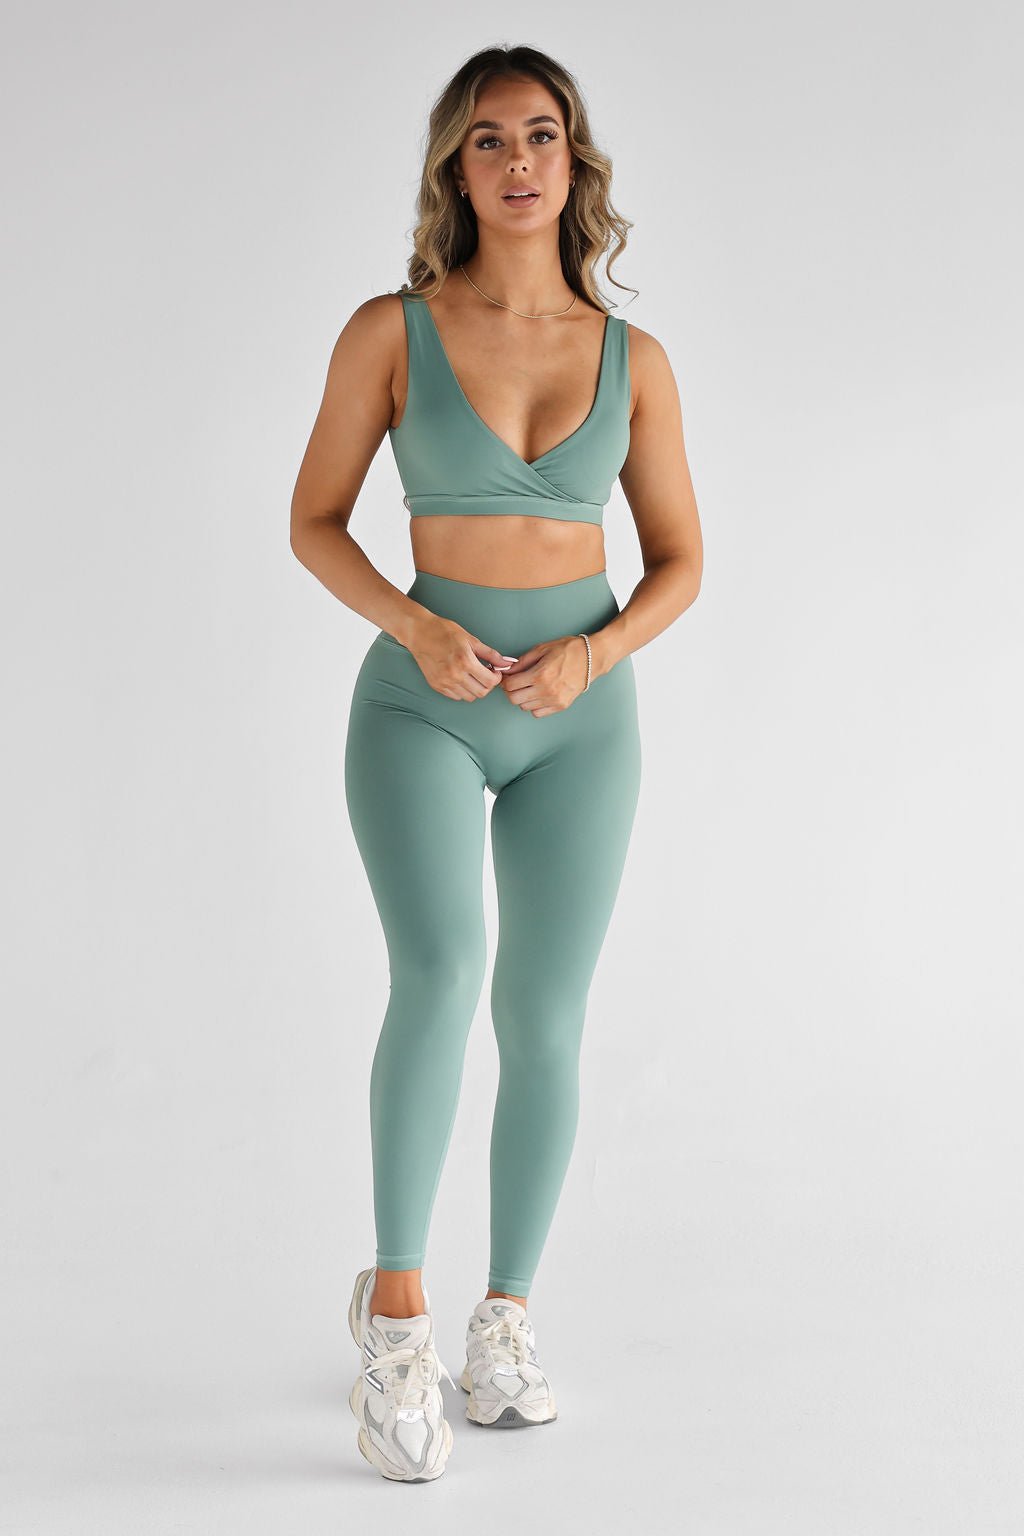 SCULPT Full Length Leggings - Sage SHIPPING FROM 3/11 - LEELO ACTIVE